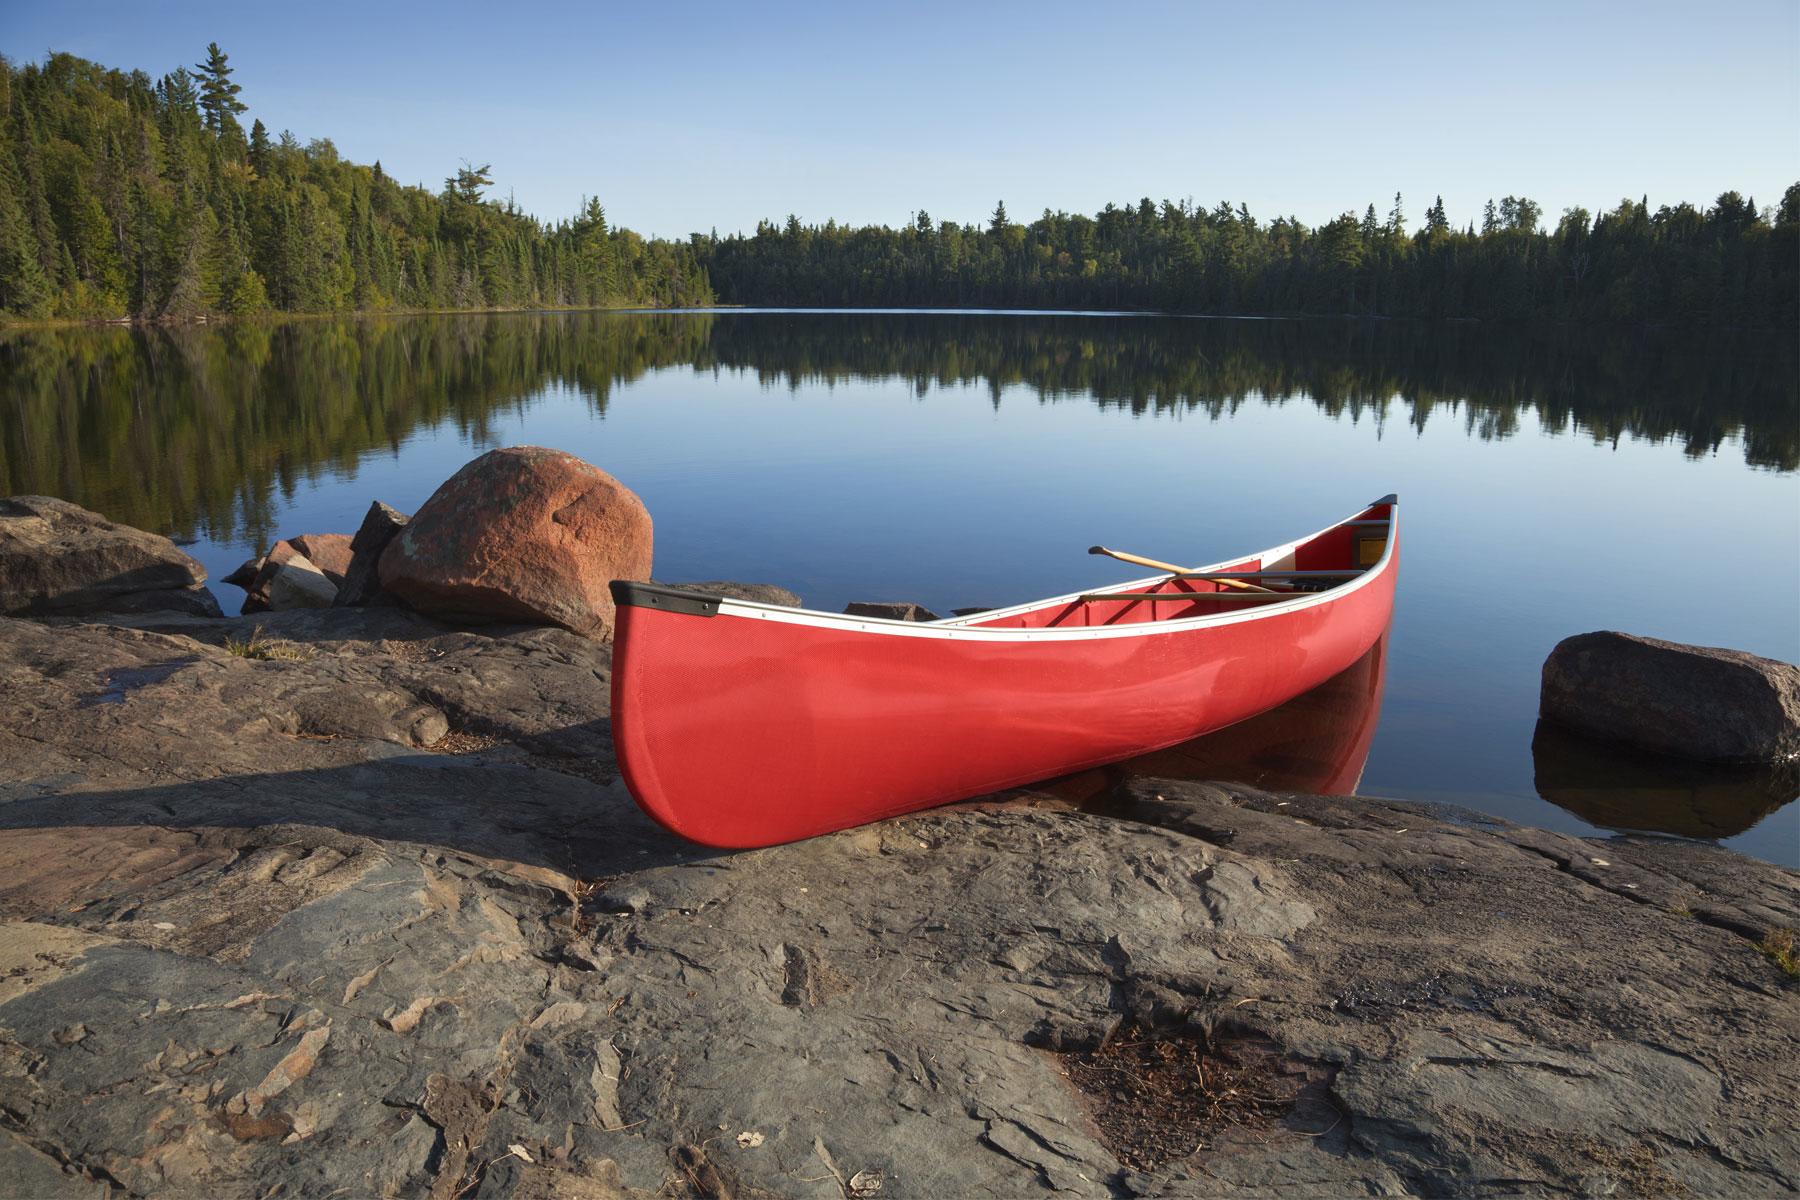 How to Camp, Canoe, and Explore Minnesota’s Boundary Waters